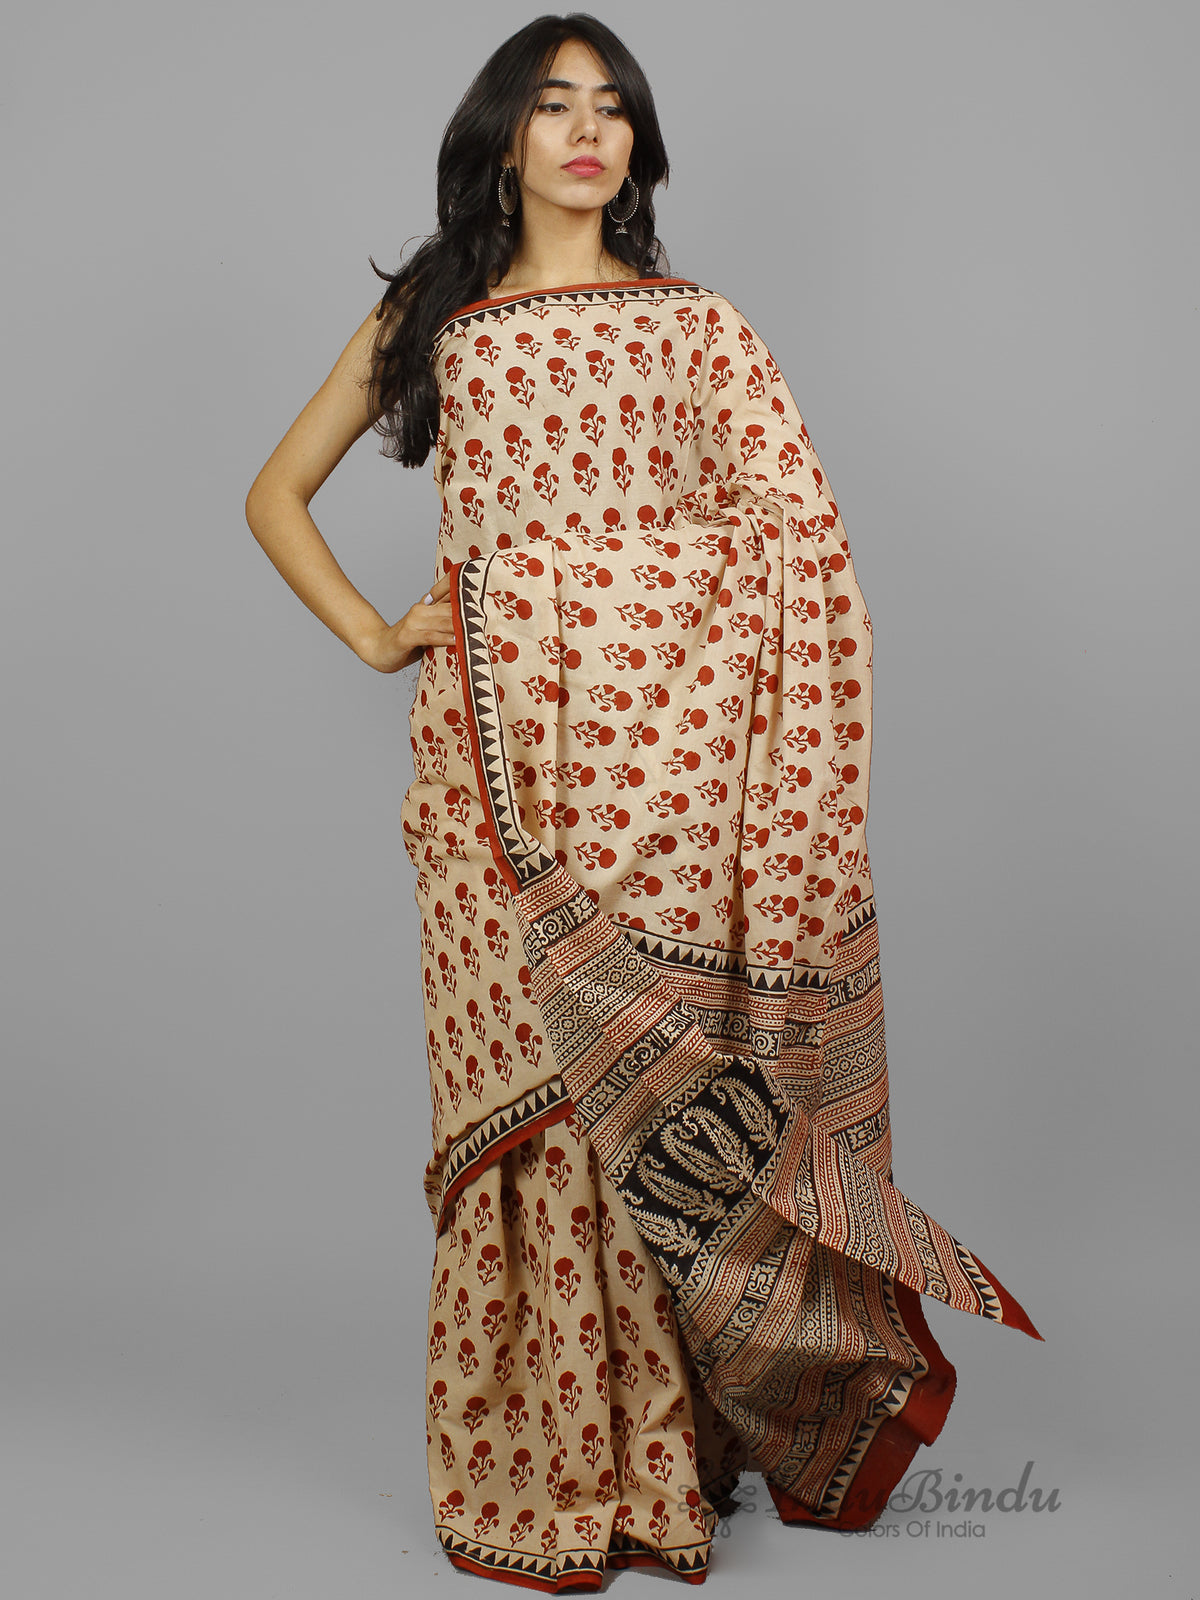 Beige Maroon Black Hand Block Printed Cotton Saree in Natural Colors - S031702247